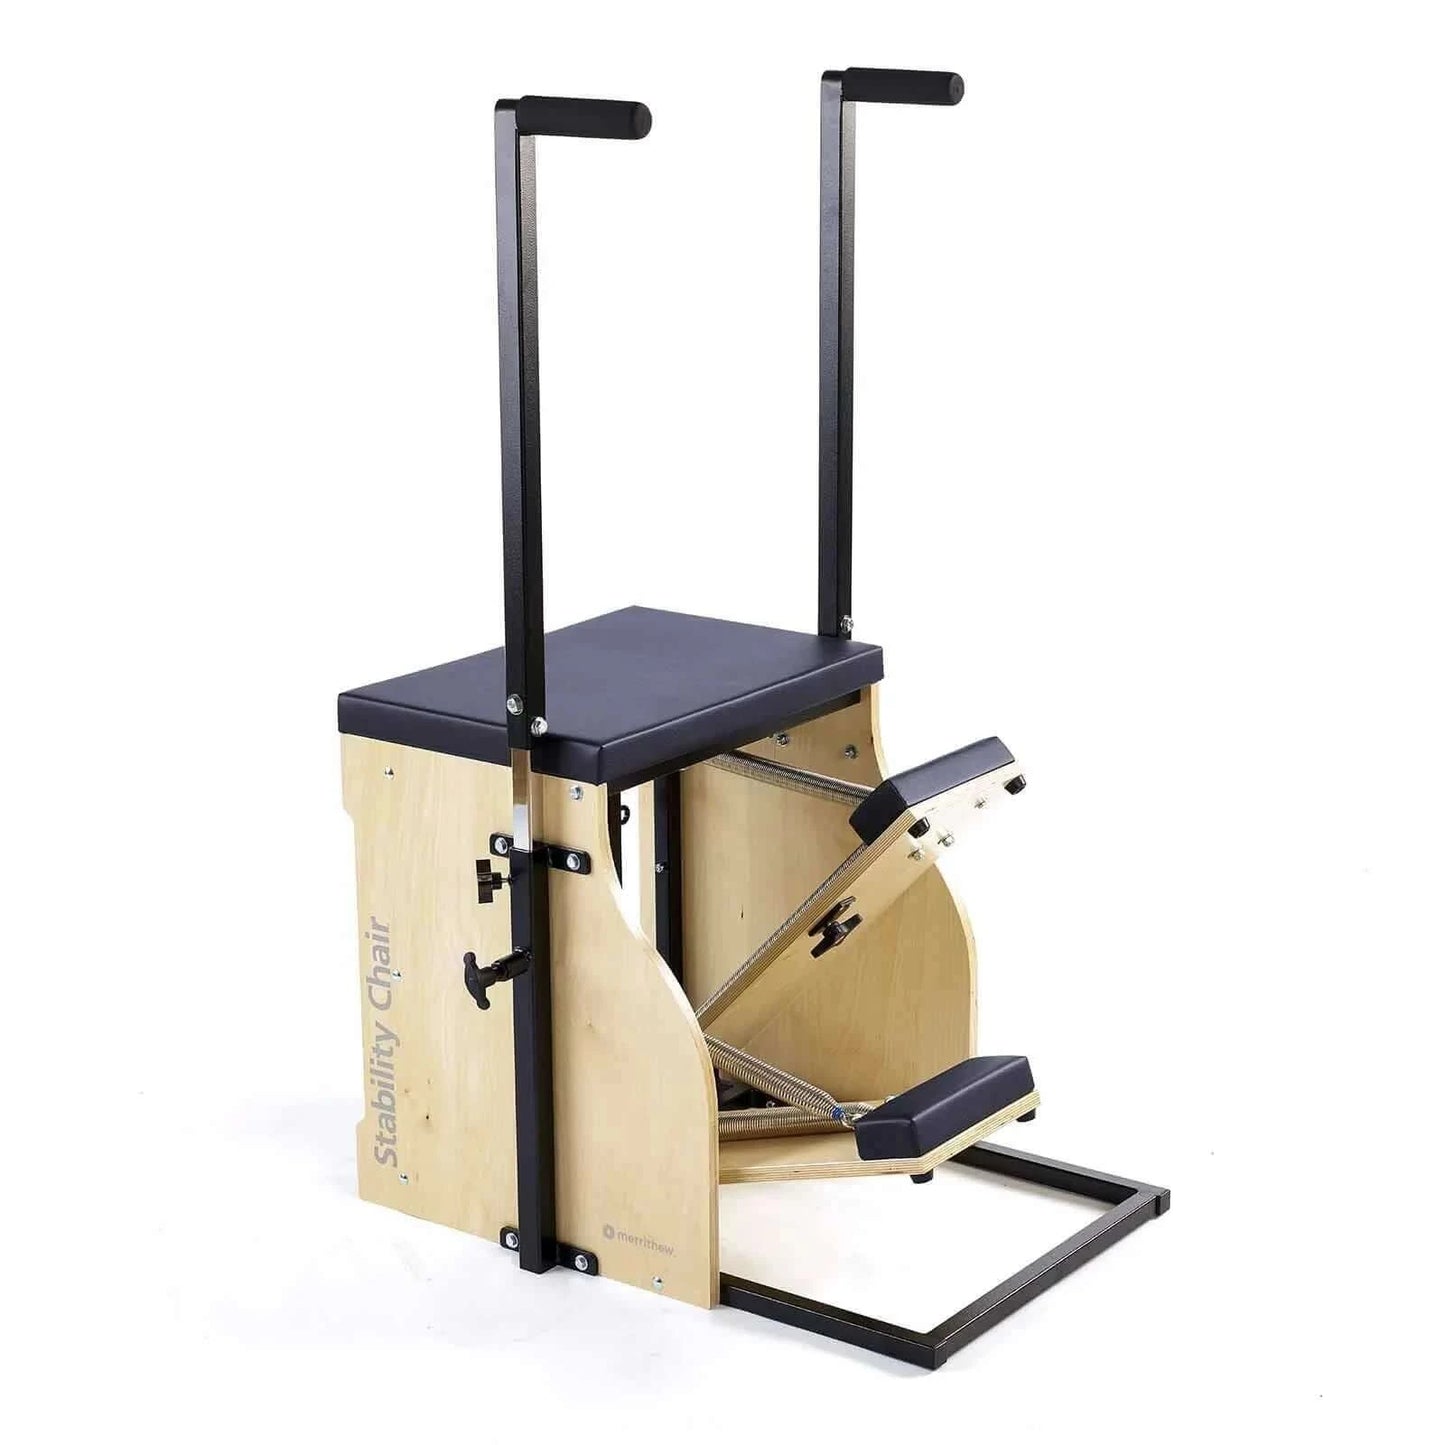 Eclipse Merrithew™ Pilates Split-Pedal Stability Chair™ by Merrithew™ sold by Pilates Matters® by BSP LLC